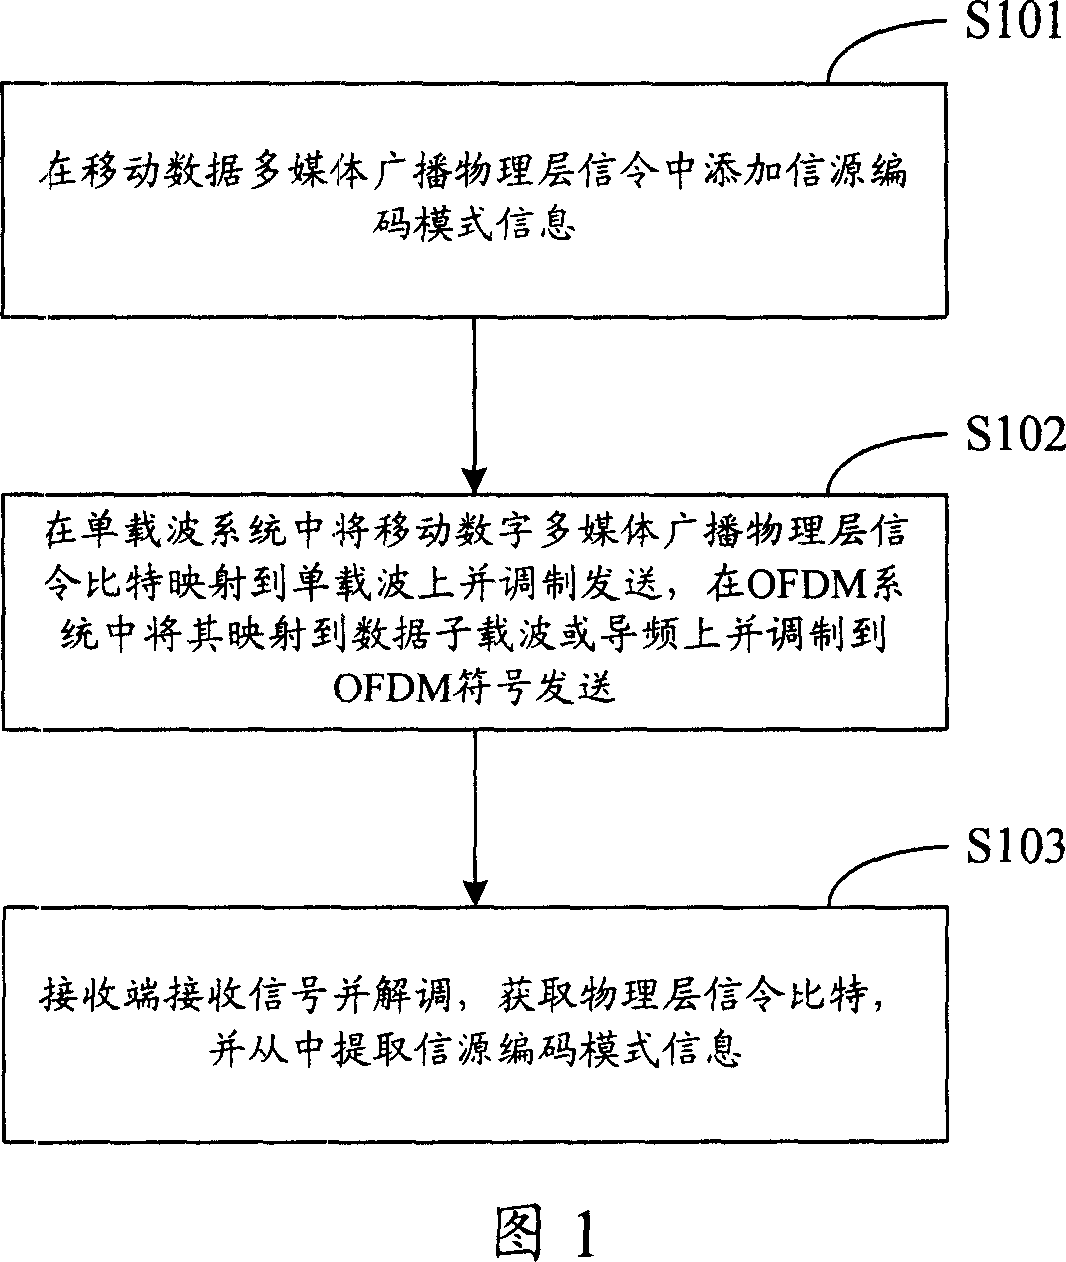 Transmission and receiving method and end of the mobile digital multi-media broadcast physical layer signaling information